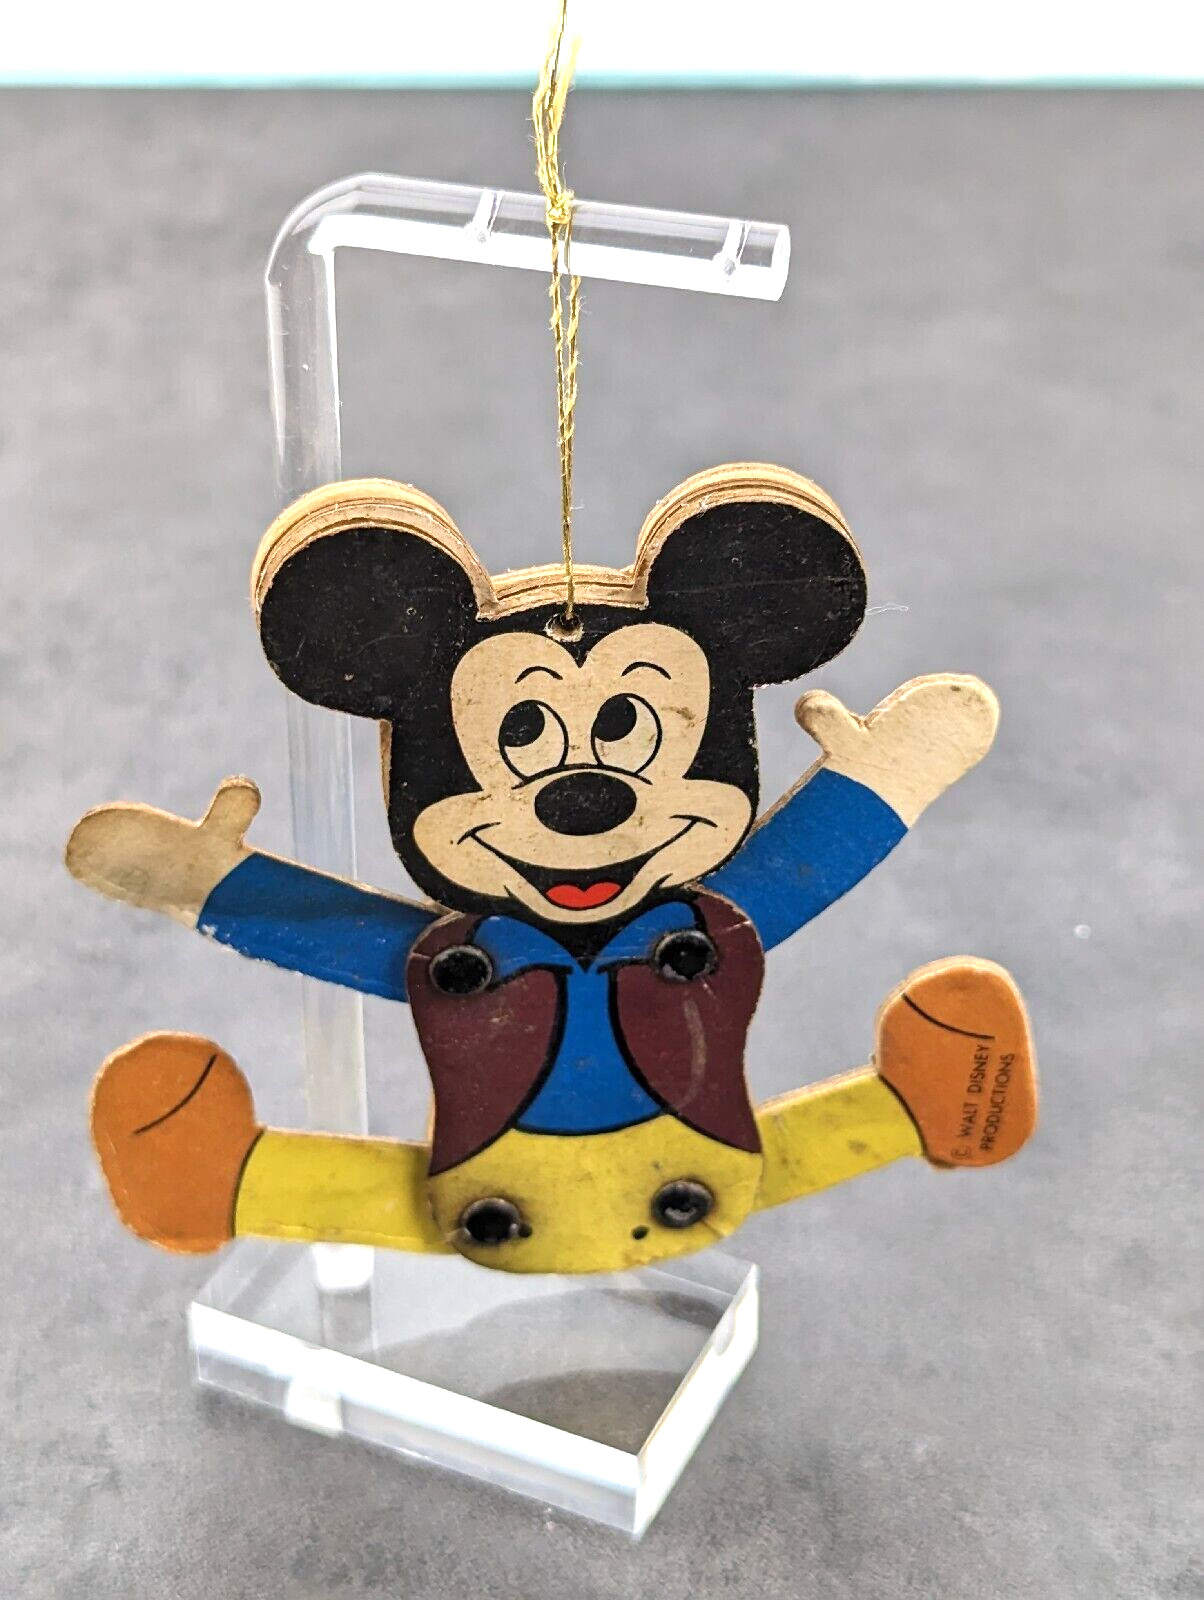 Vintage Mickey Mouse Disney Ornament Poseable Figure Paper Jointed Wood E4